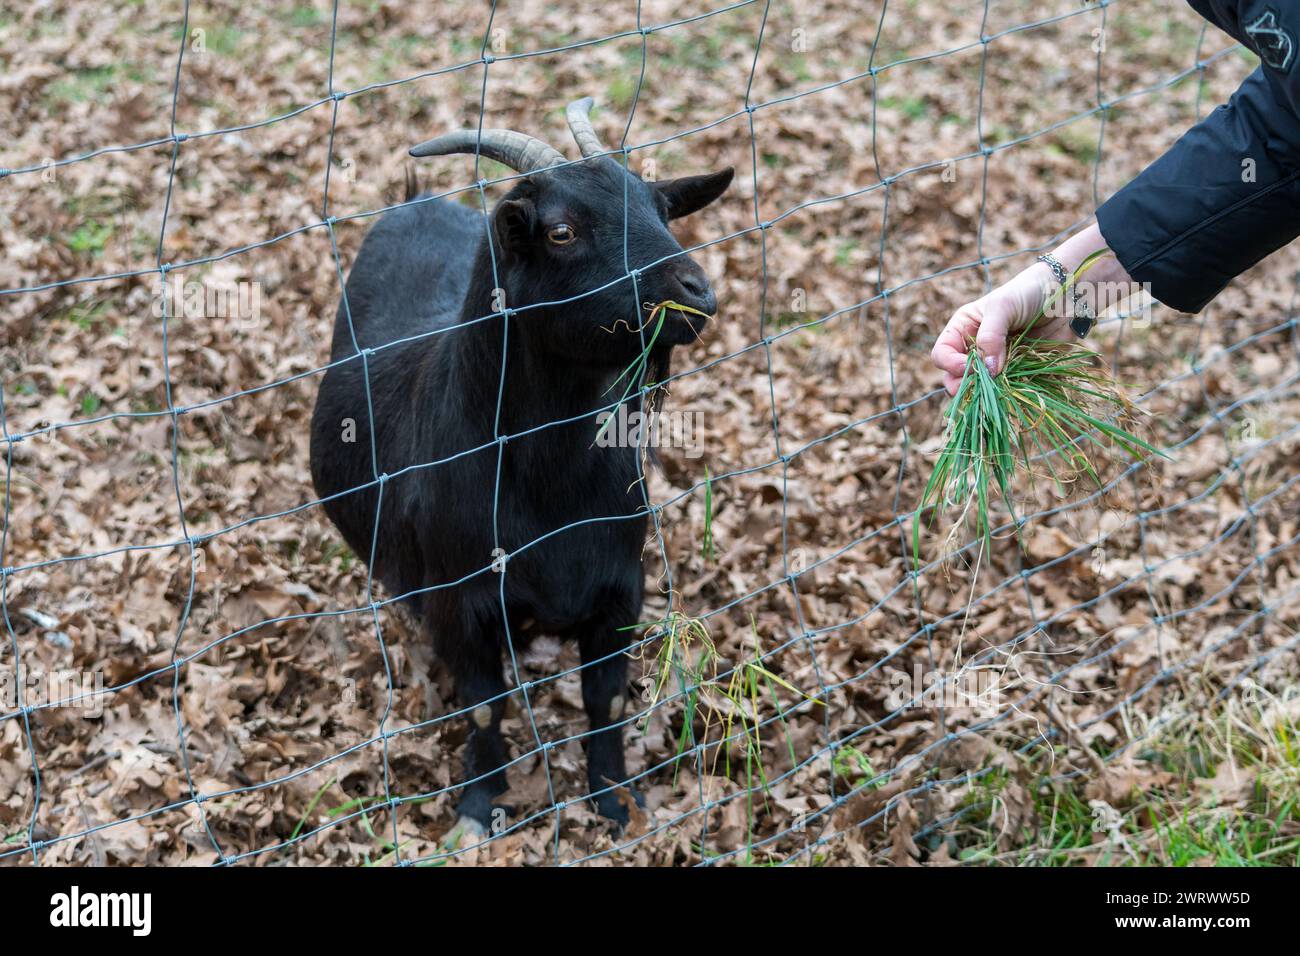 Small black goat in a fence on a farm. The animal approaches the net where a girl feeds it some grass. Stock Photo